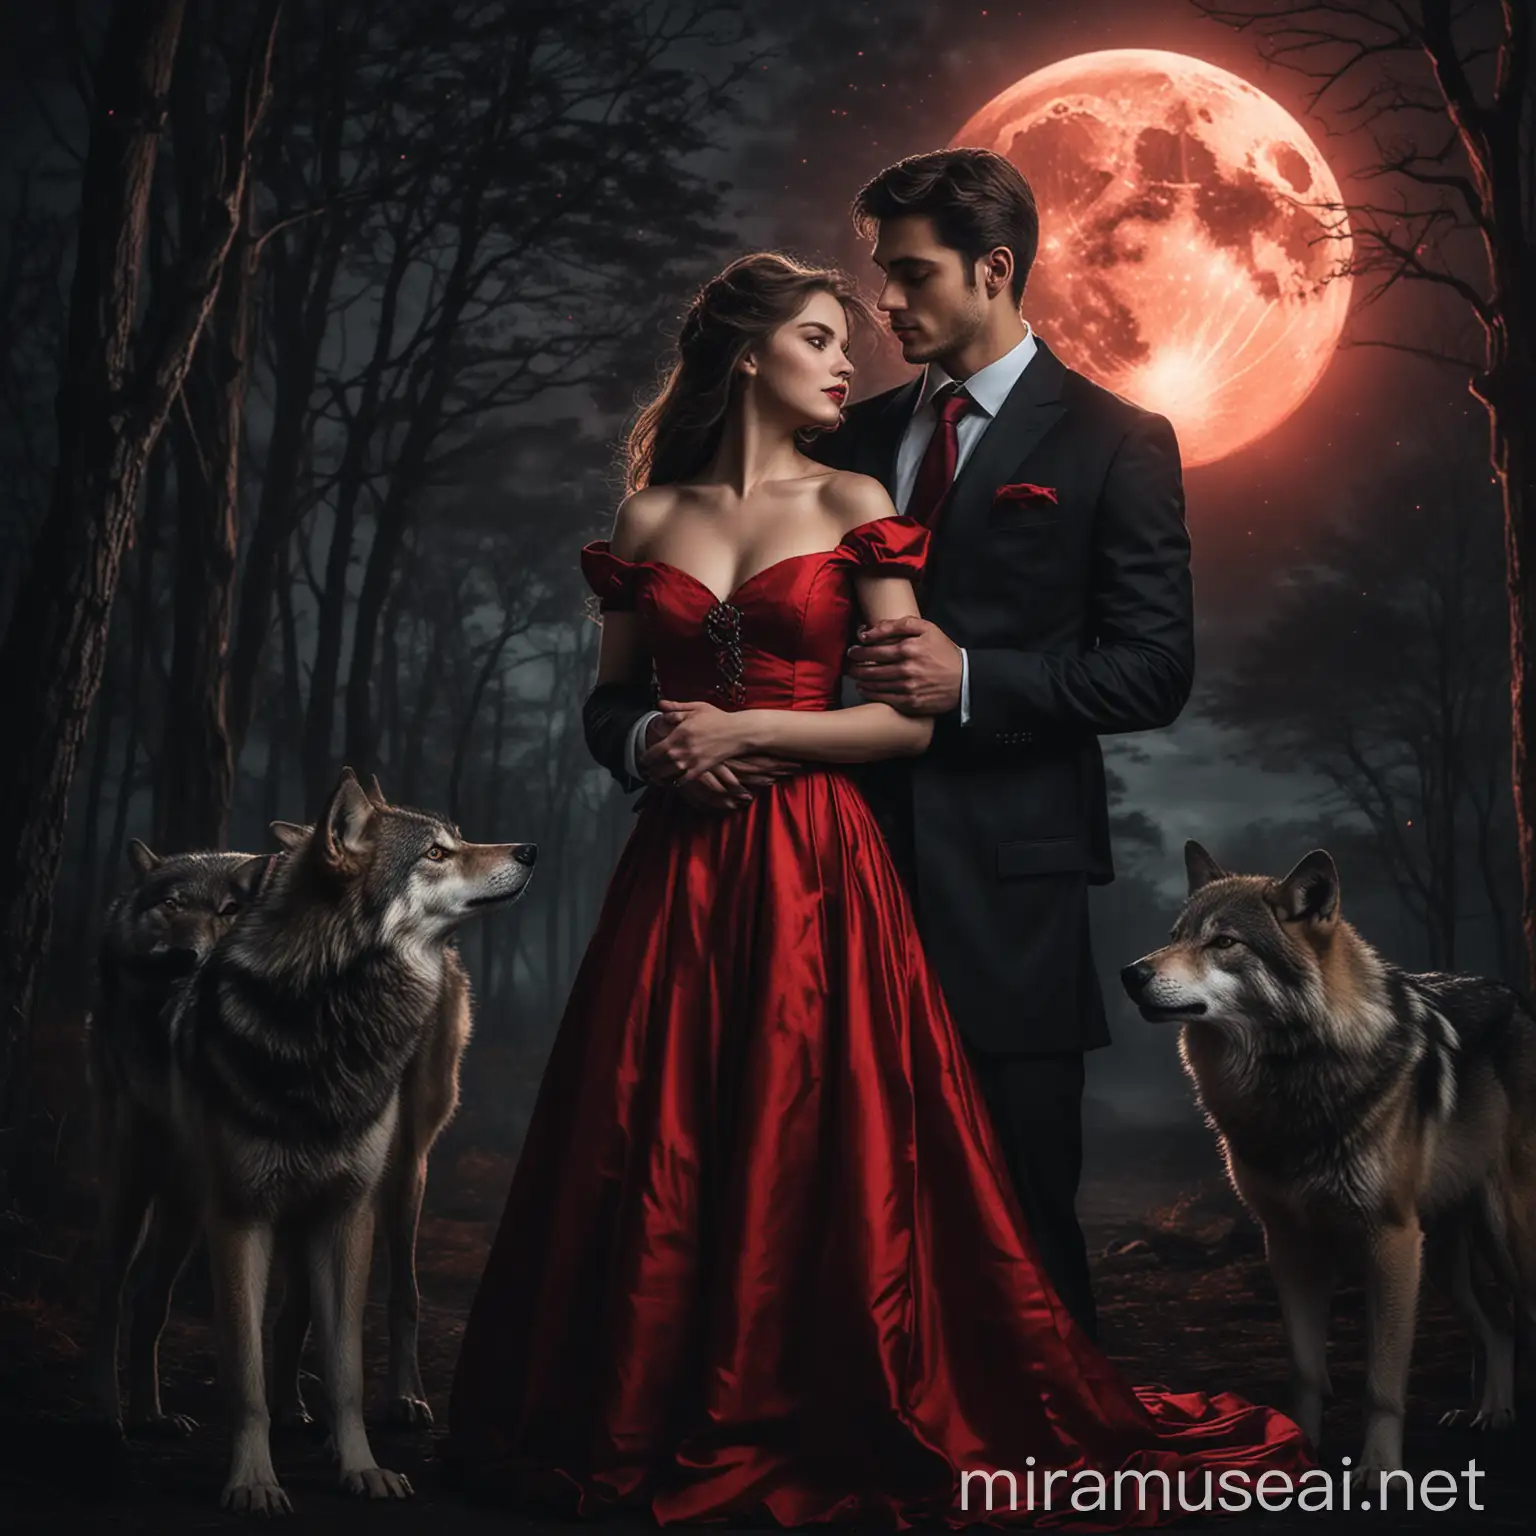 Romantic Couple with Wolves under Glowing Moonlight